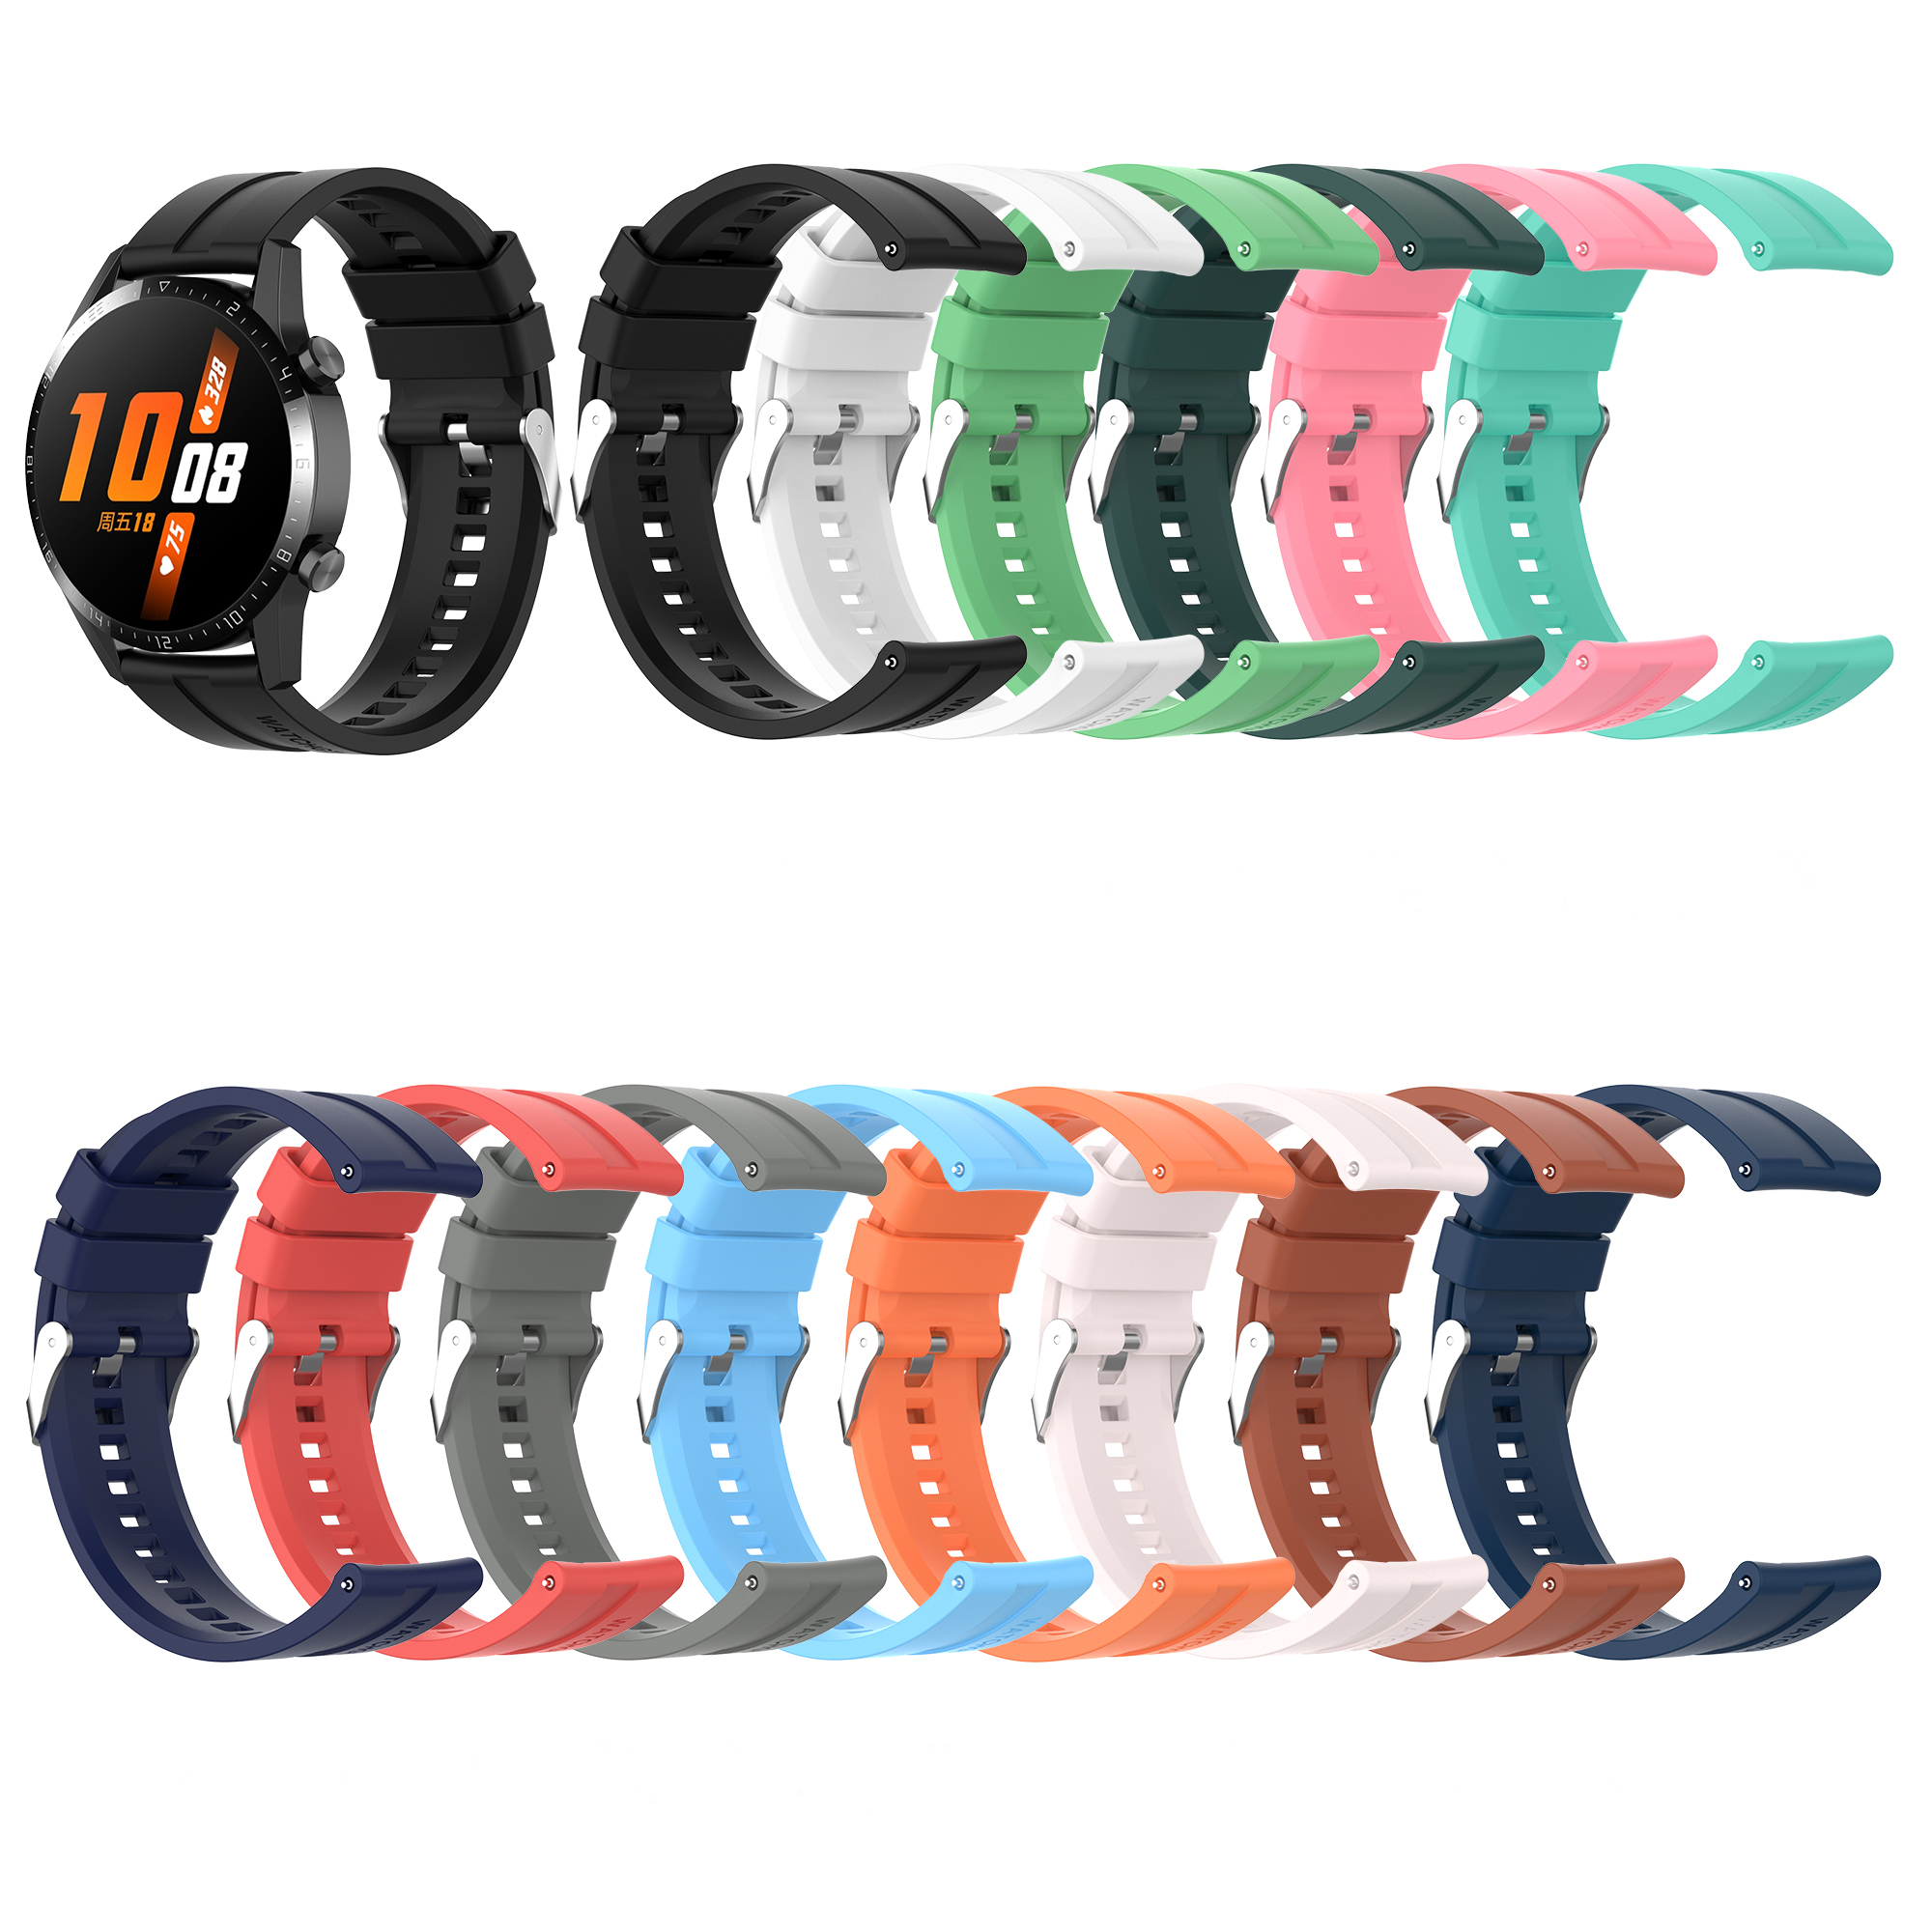 Bakeey-22mm-Multi-color-Silicone-Replacement-Strap-Smart-Watch-Band-For-Huawei-Watch-GT2-46MMGT2-Pro-1800244-1